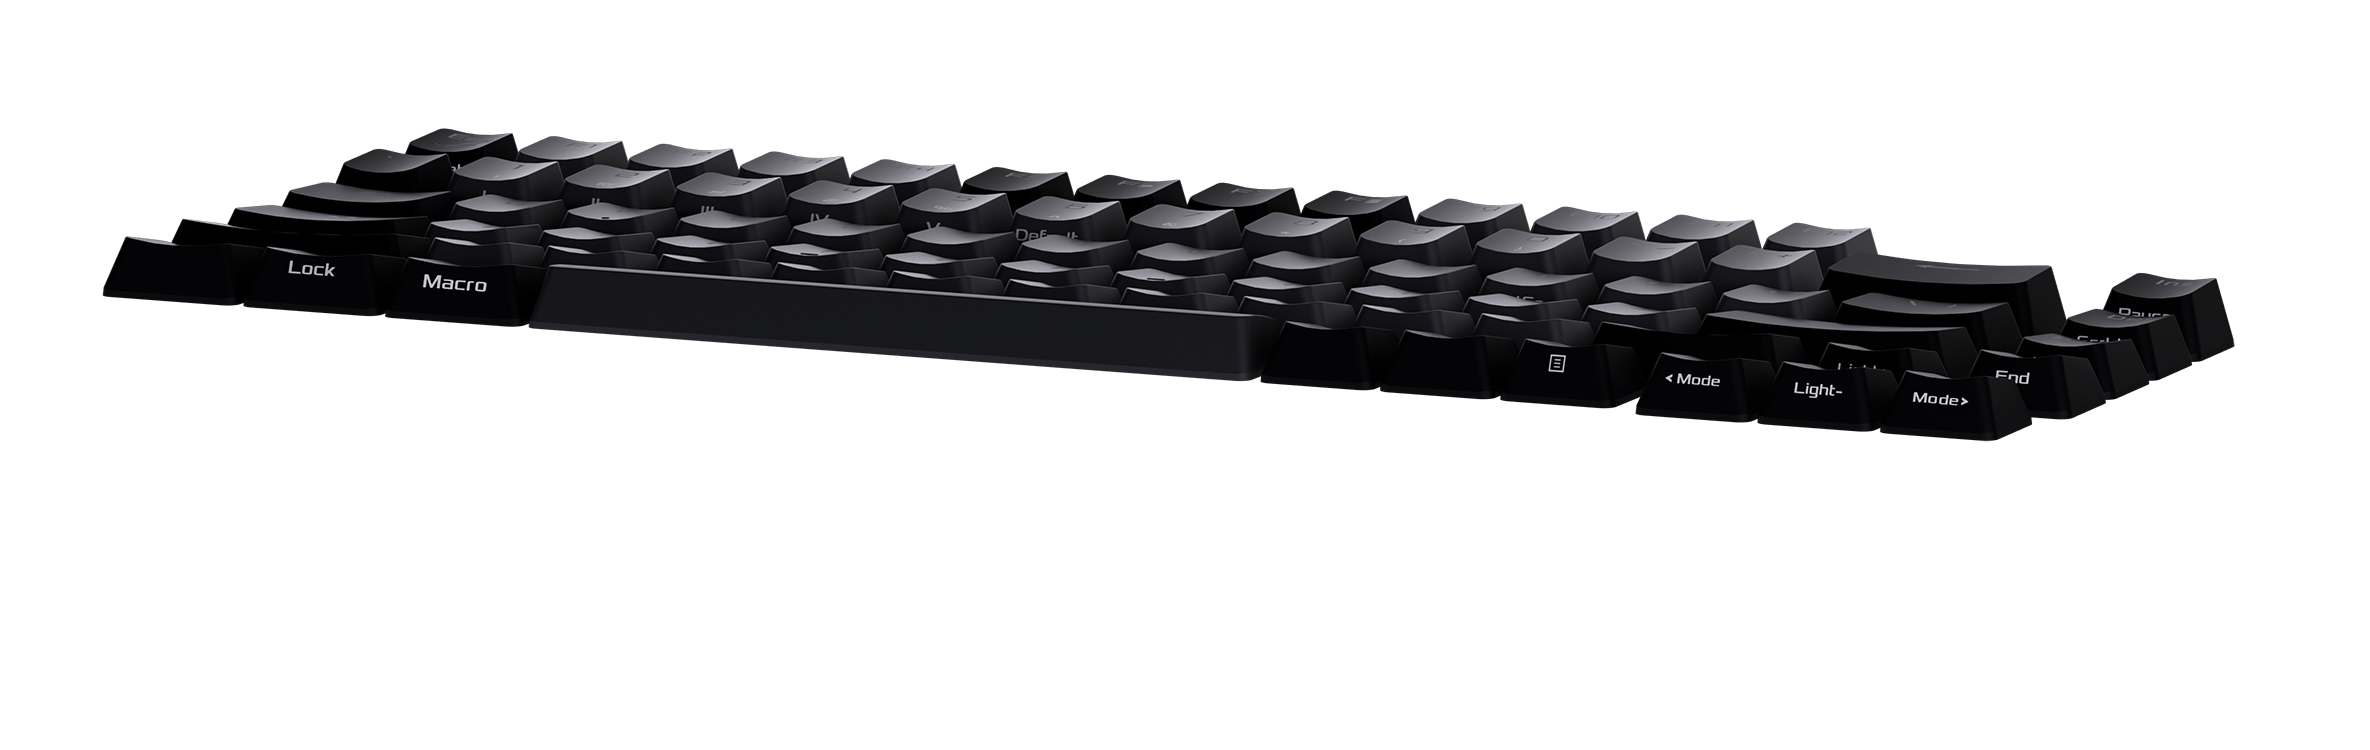 The ASUS ROG Azoth is a gaming and custom keyboard fused together